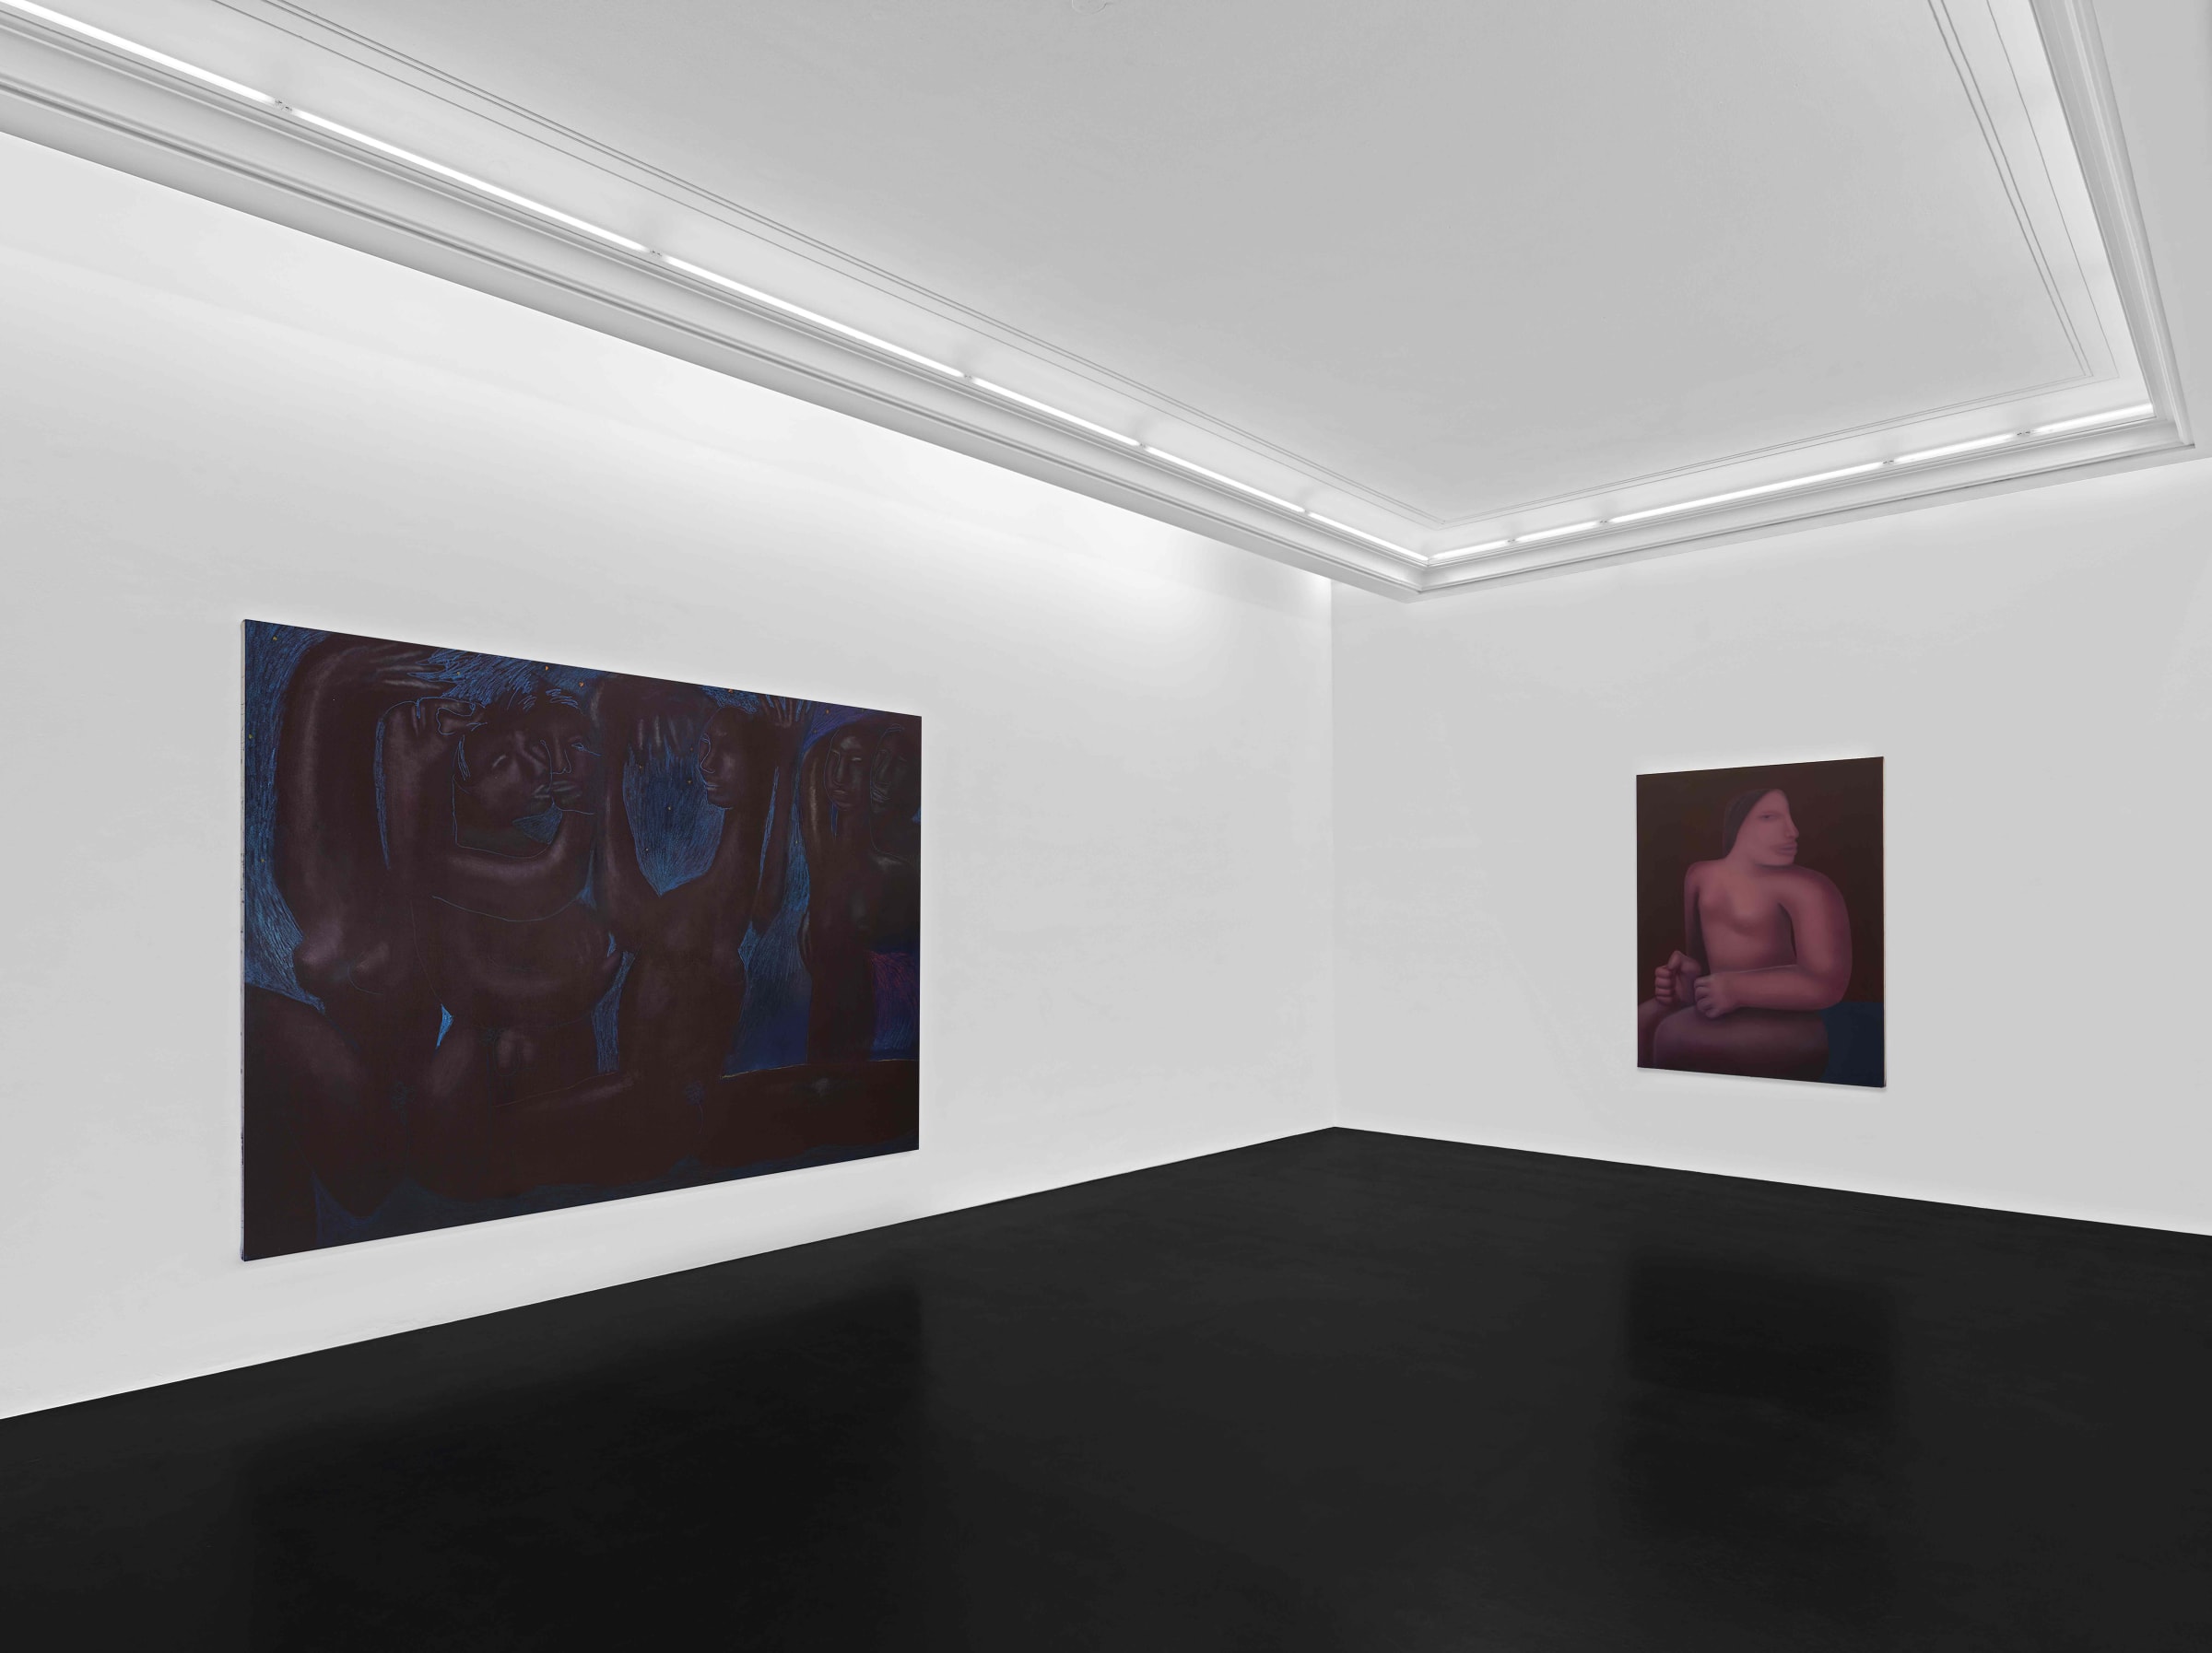 George Rouy Maelstrom Installation View January 17 – February 14, 2020 Peres Projects, Berlin Photographed by: Matthias Kolb